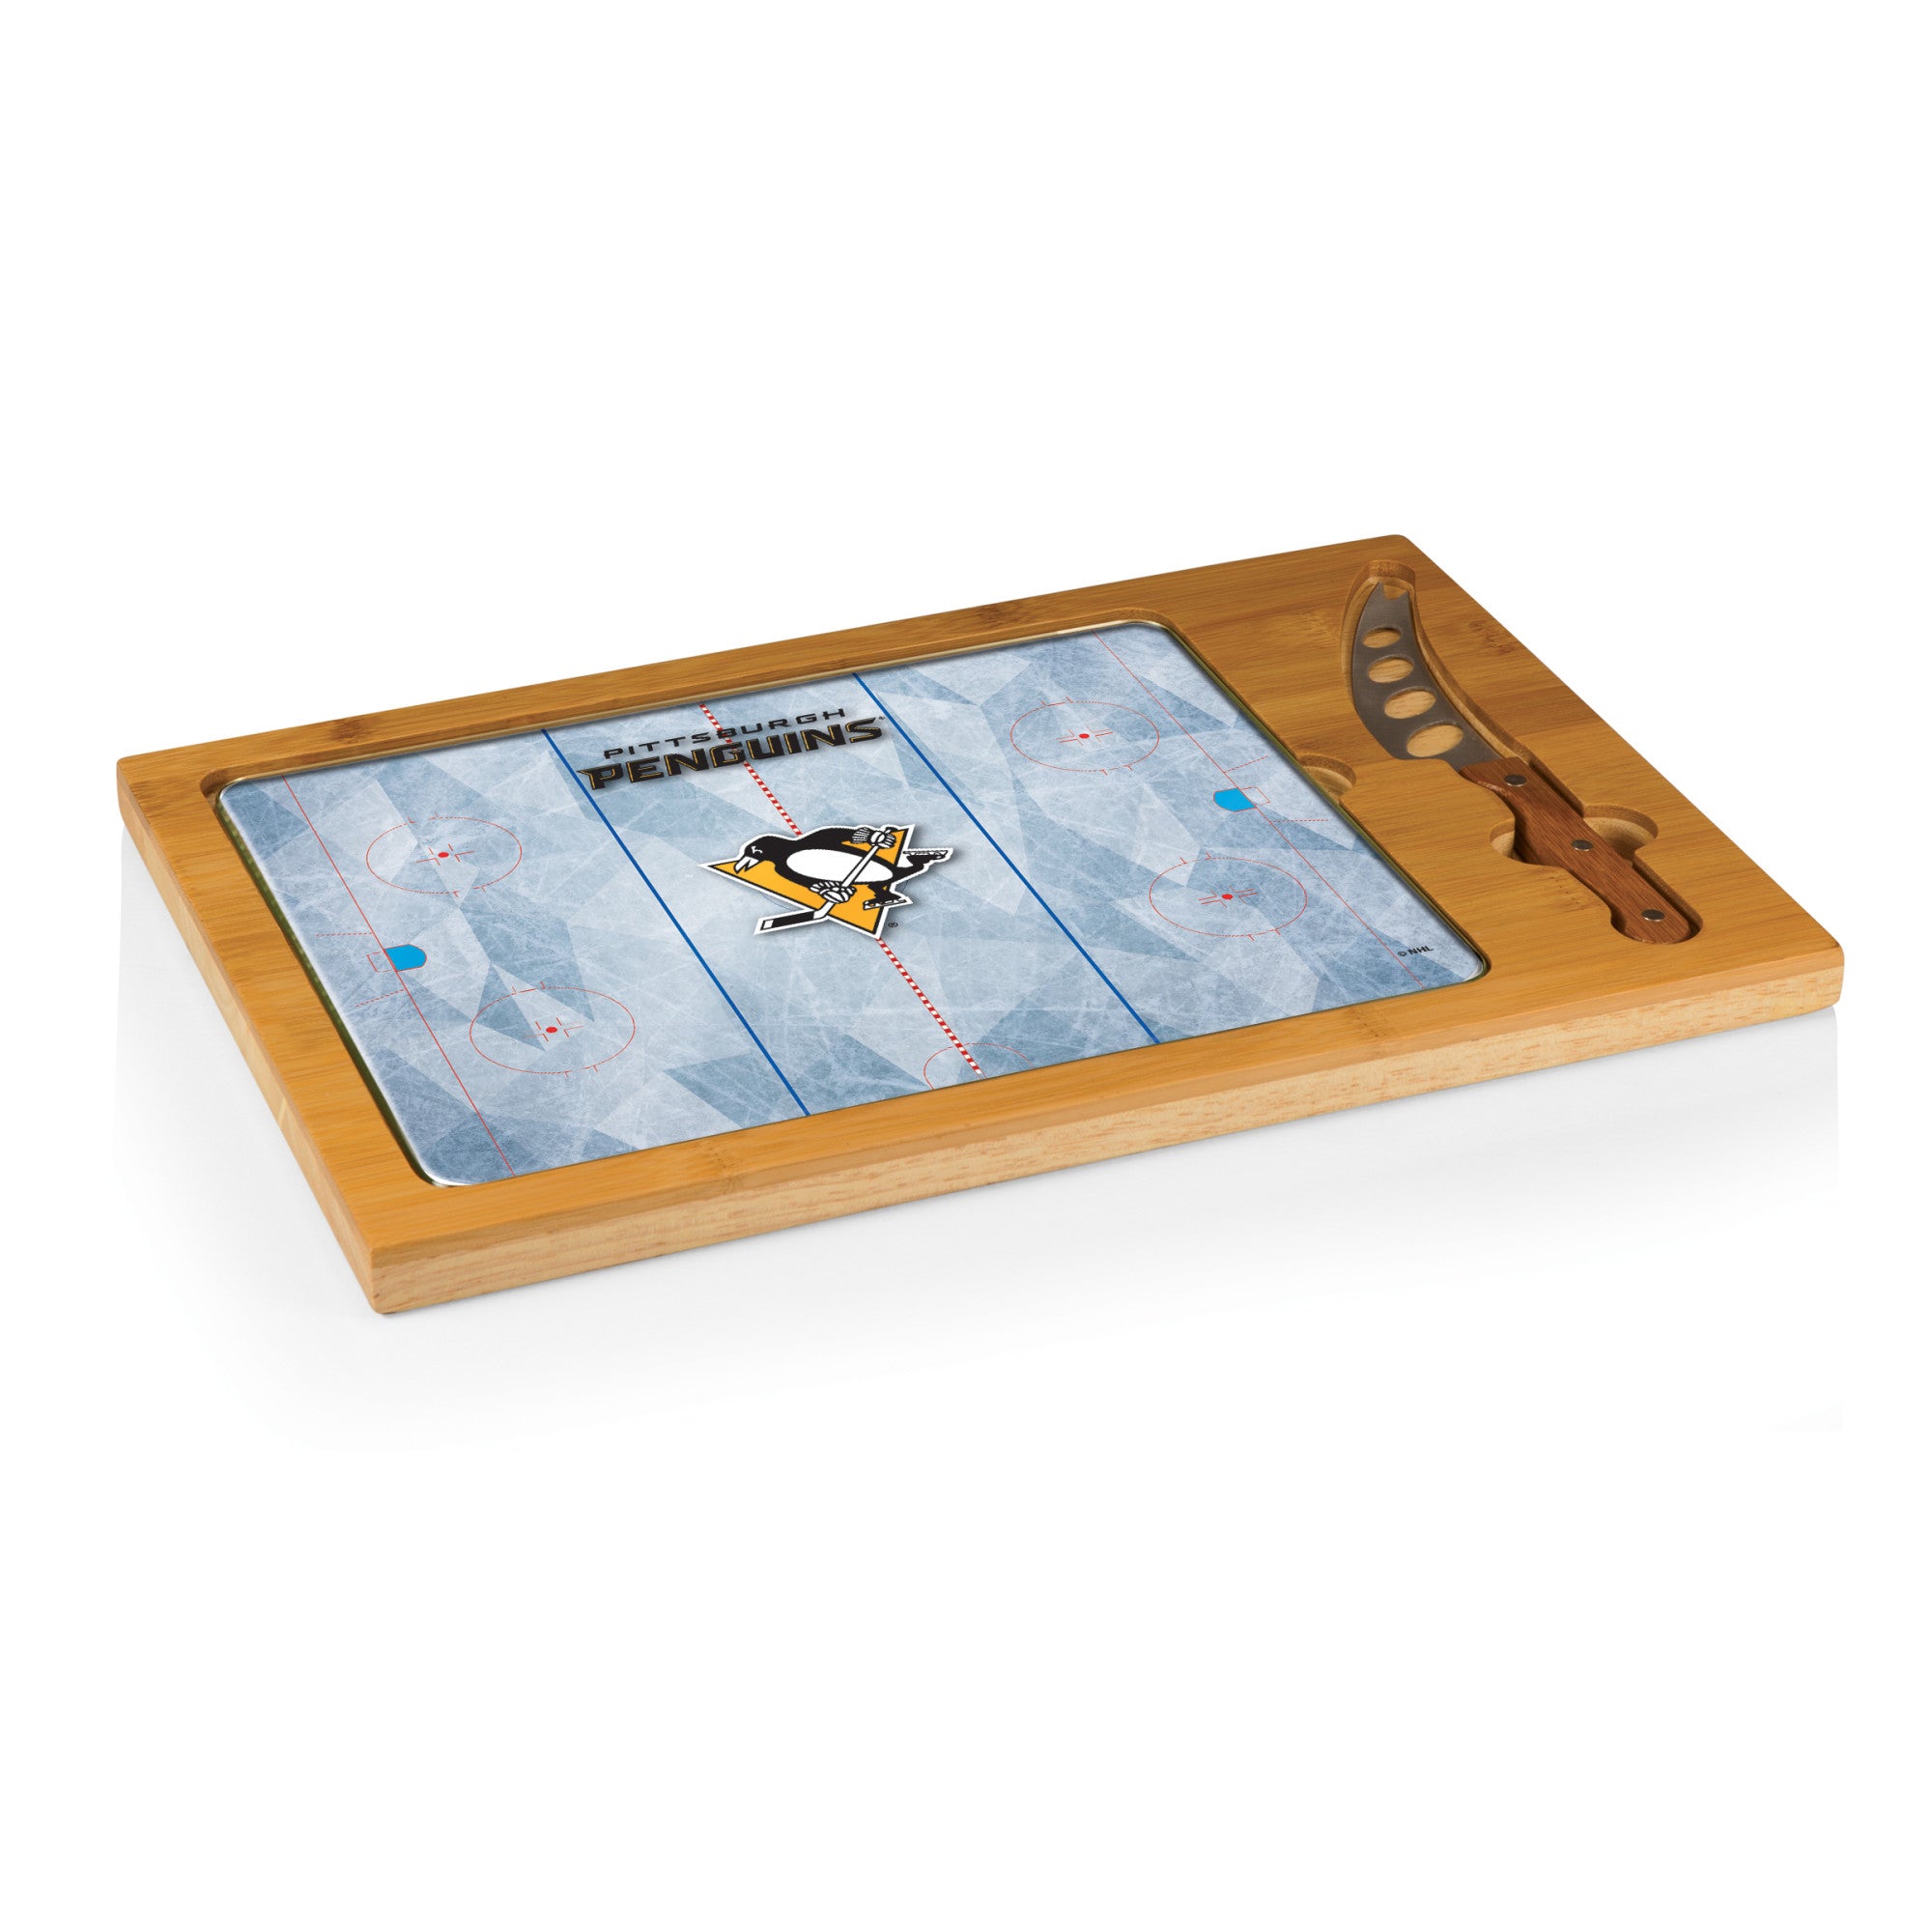 Pittsburgh Penguins Hockey Rink - Icon Glass Top Cutting Board & Knife Set